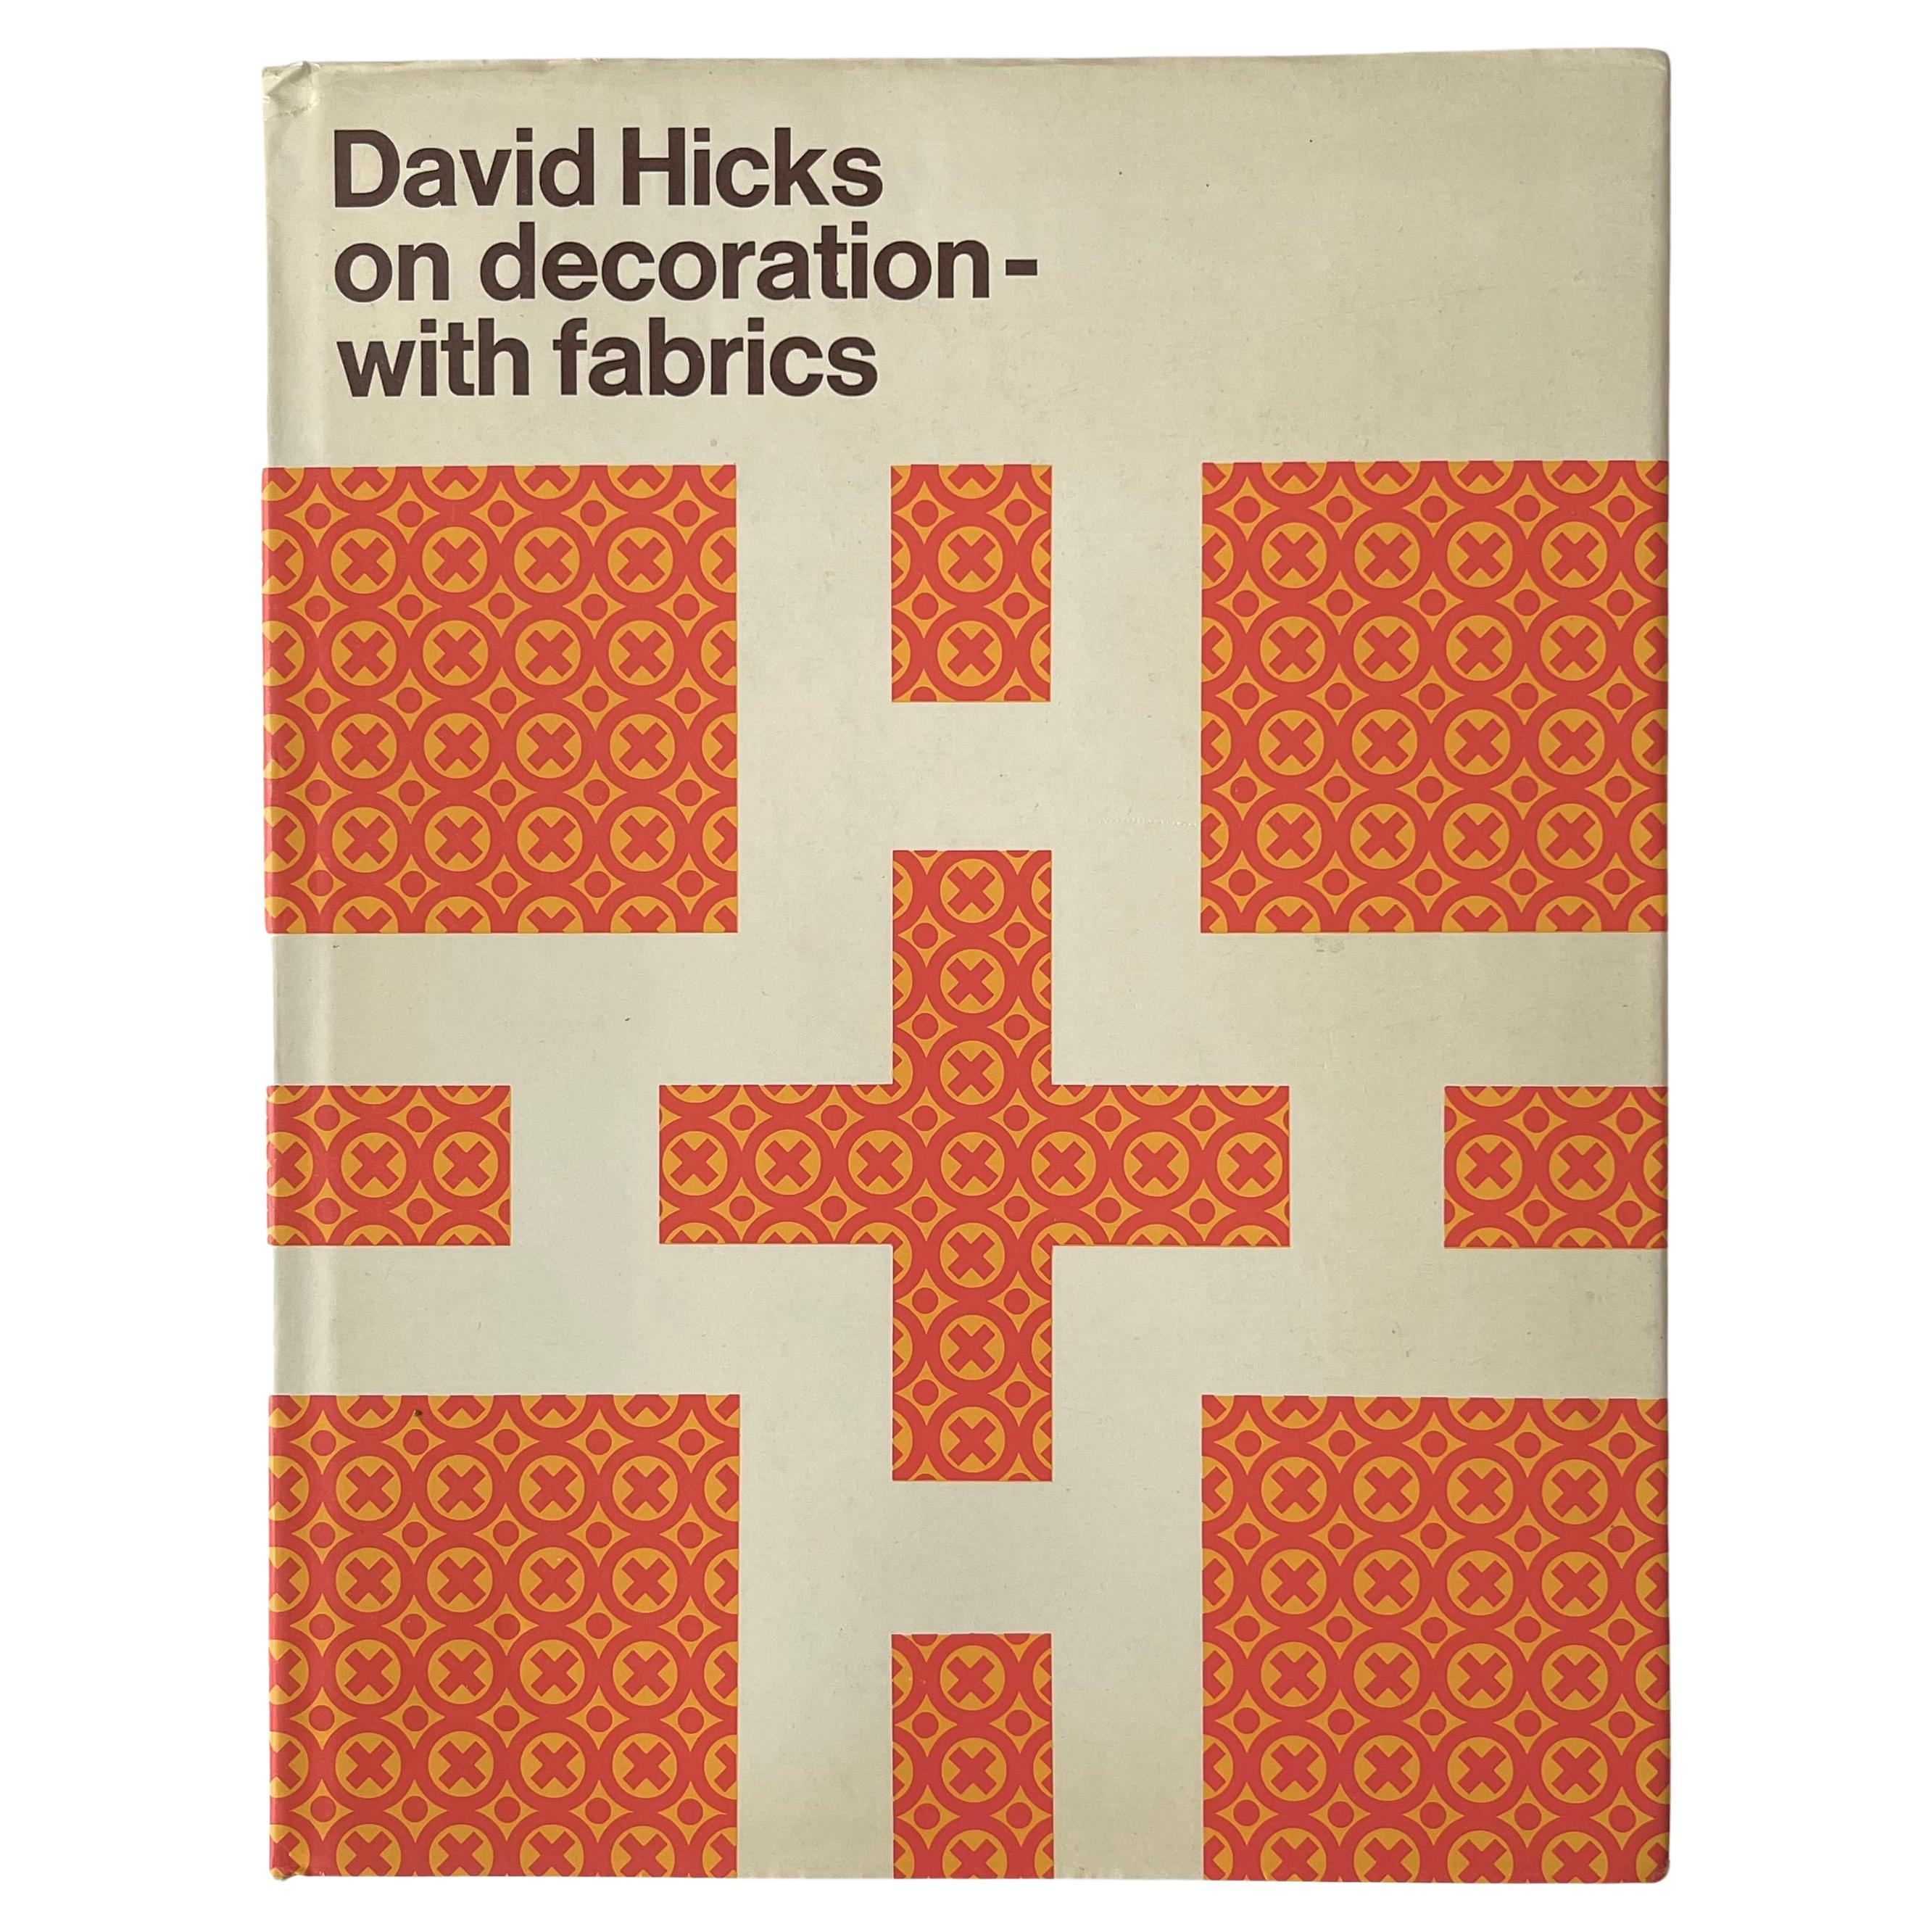 David Hicks on Decoration - with fabrics 1st US Edition 1971 For Sale